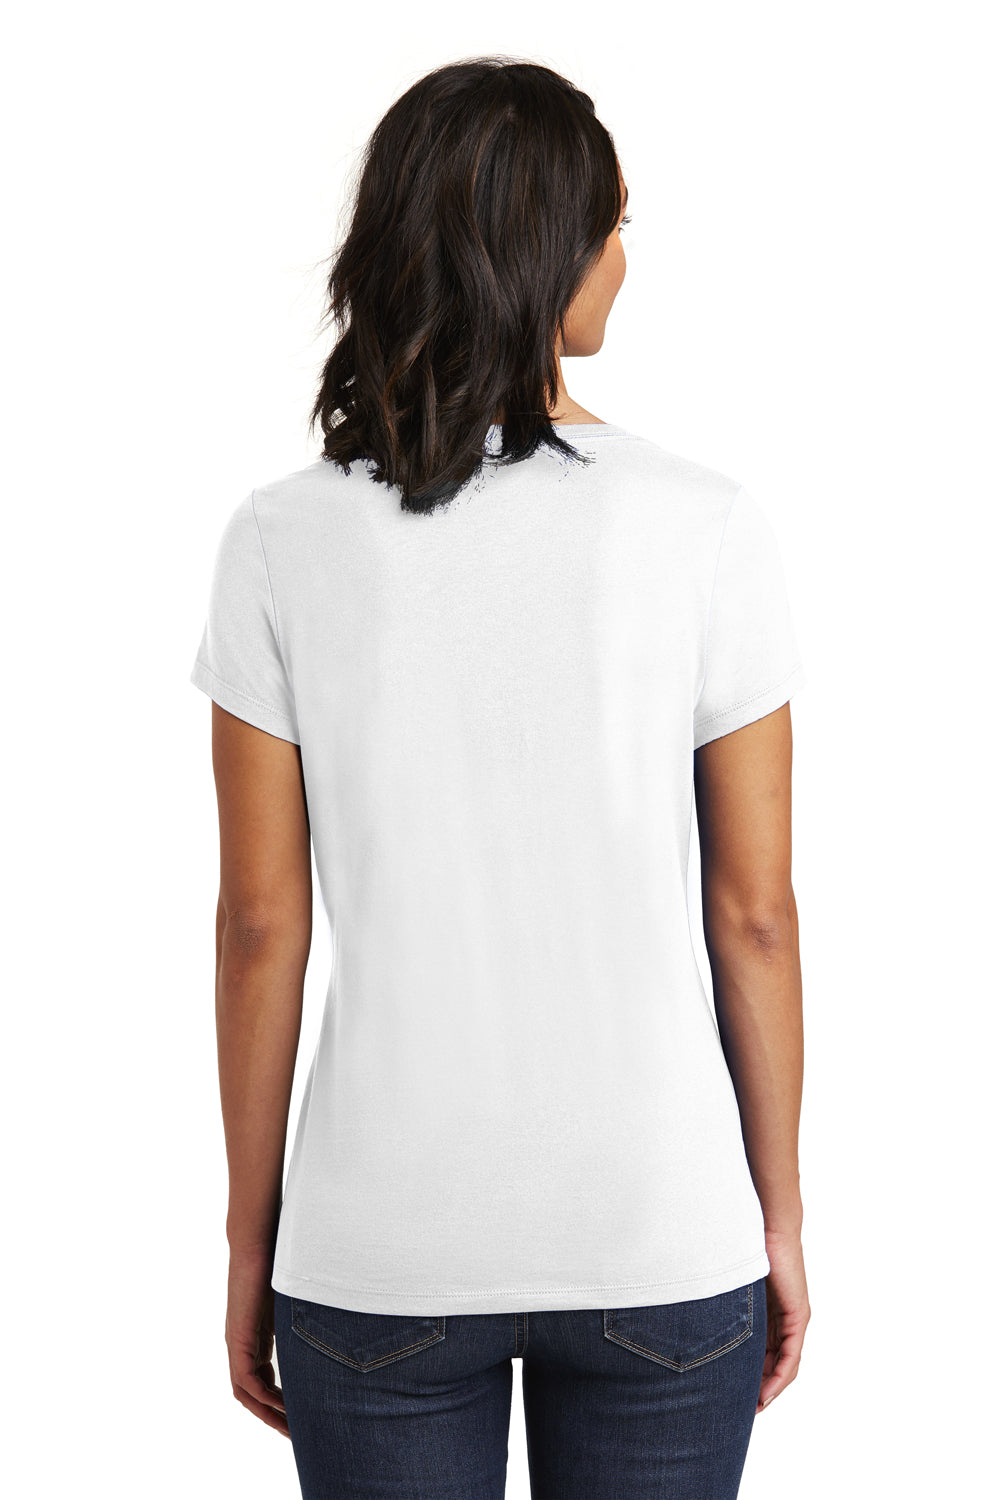 District DT6503 Womens Very Important Short Sleeve V-Neck T-Shirt White Back